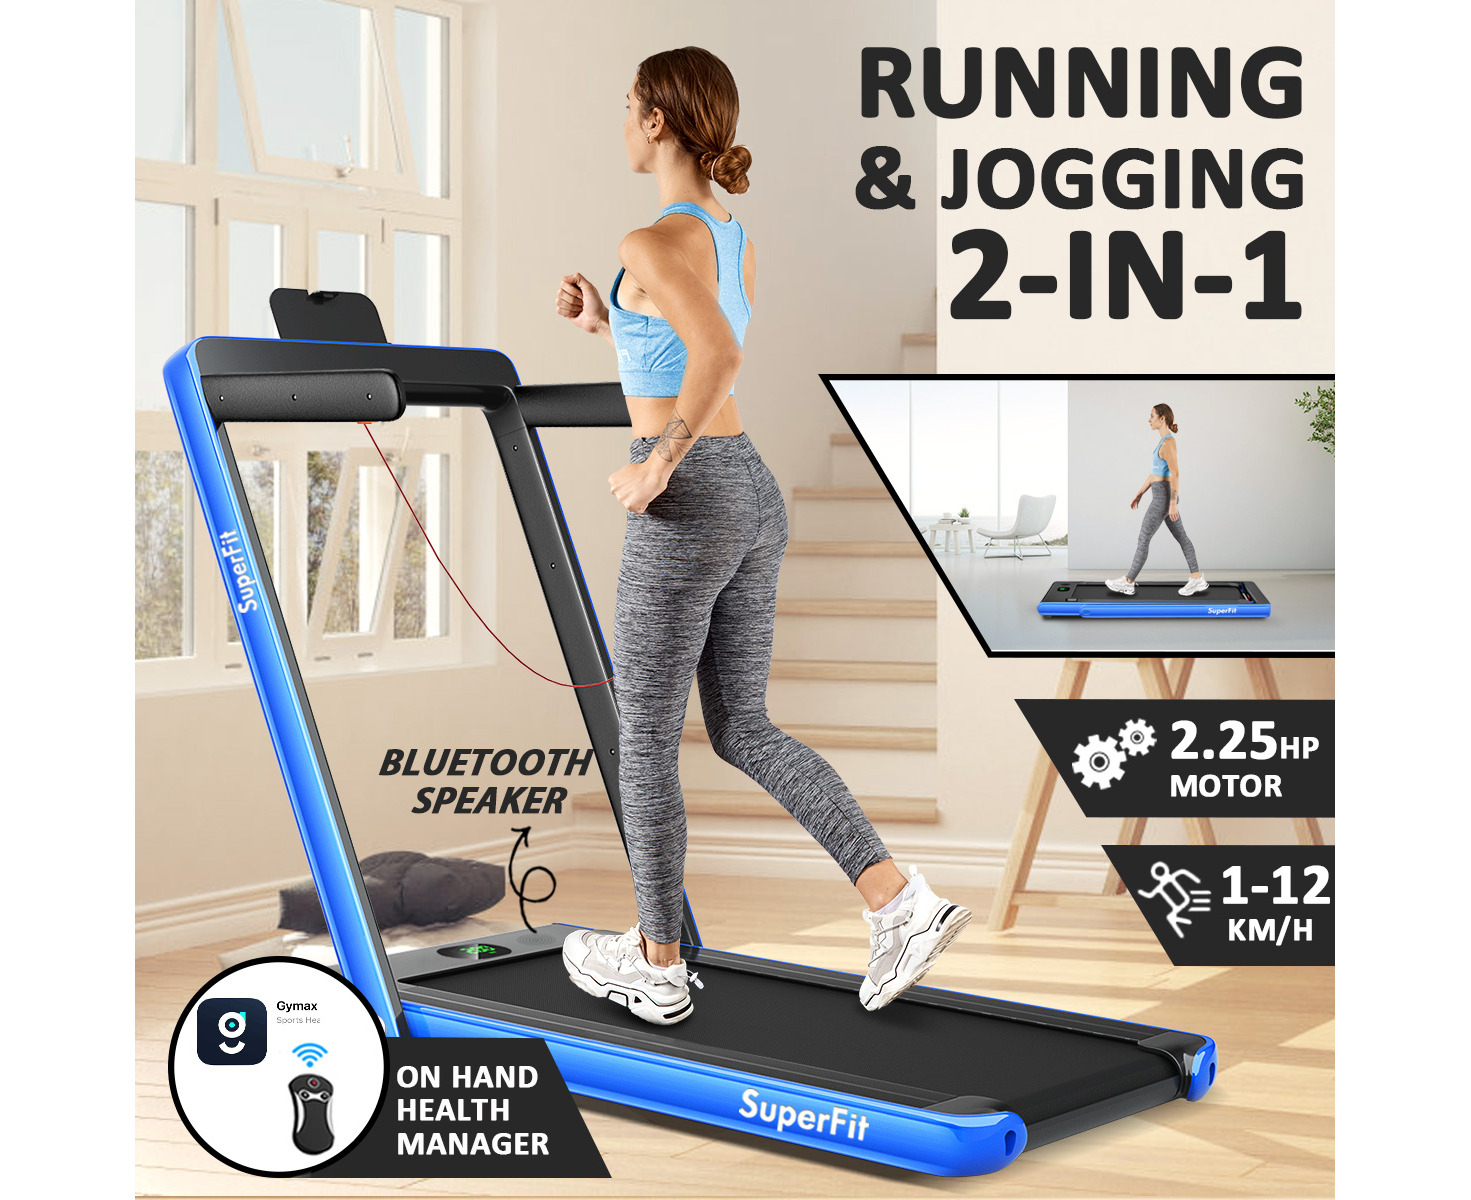 Mechanical Treadmill Running Machine with LED Display for Home Gym Cardio Fitness Workout Folding Treadmill for Home Use Portable Walking Treadmills 